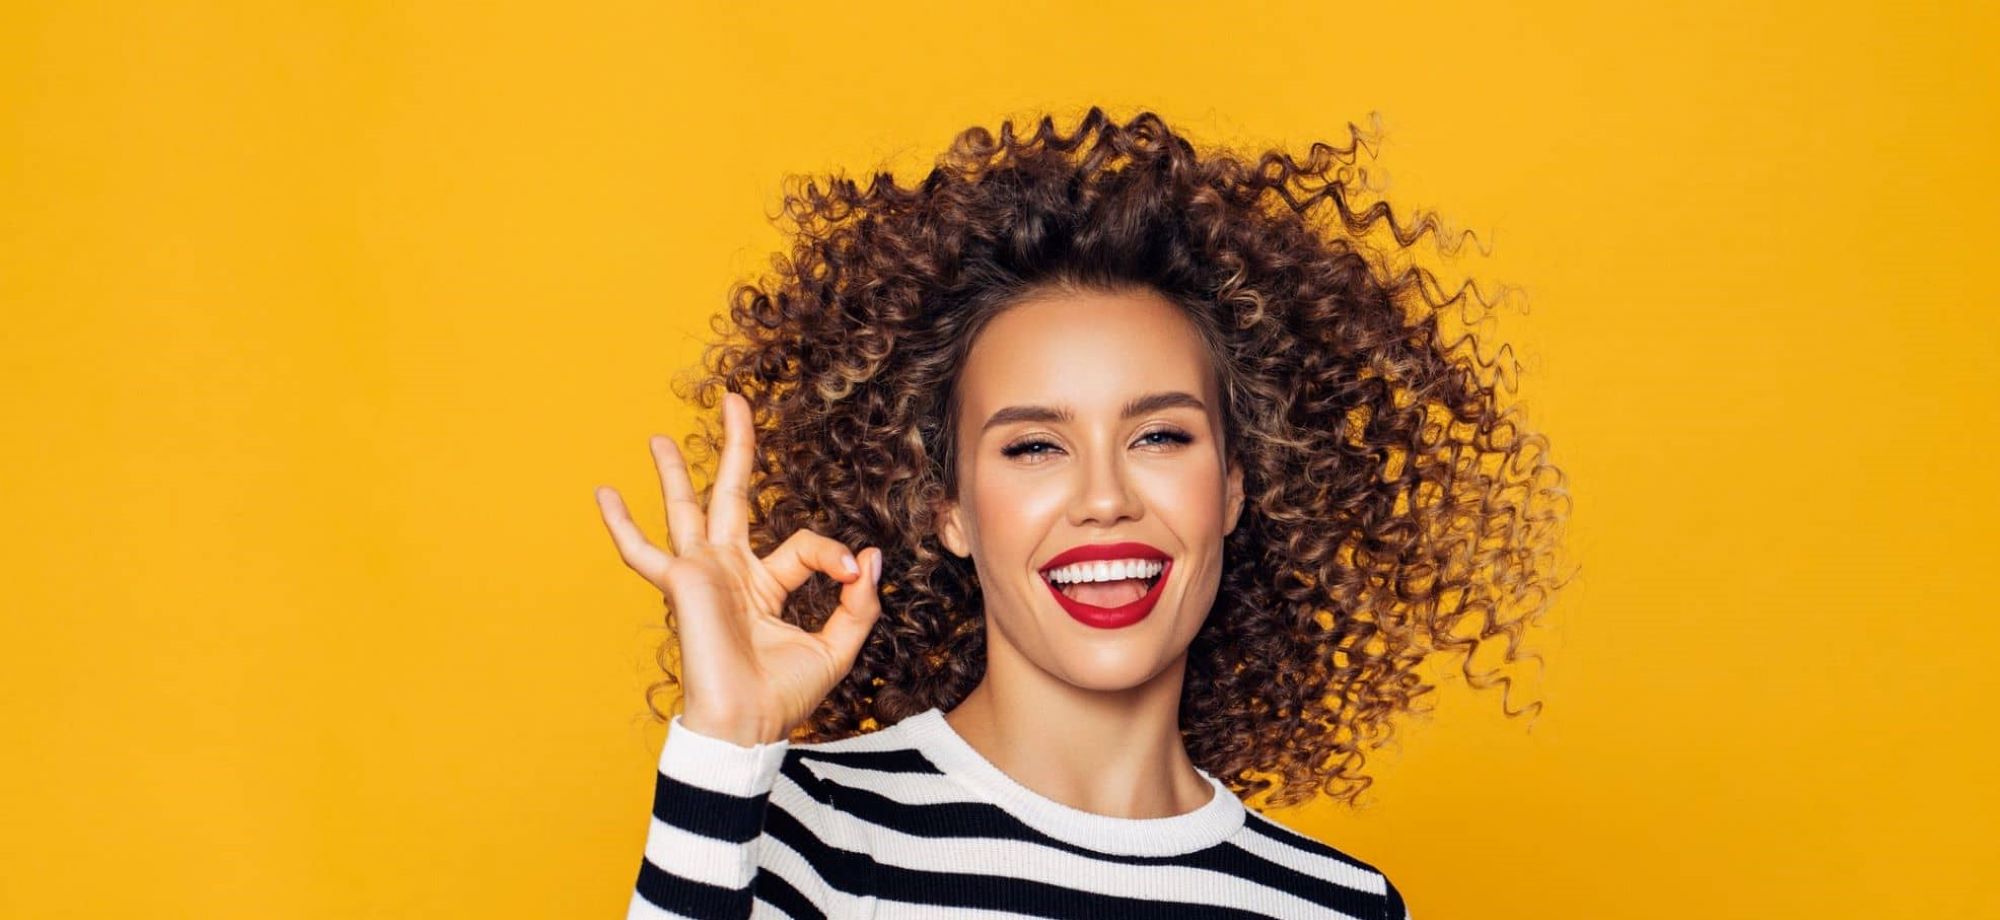 beautiful woman with curly hair and huge smile in front of mustard yellow background